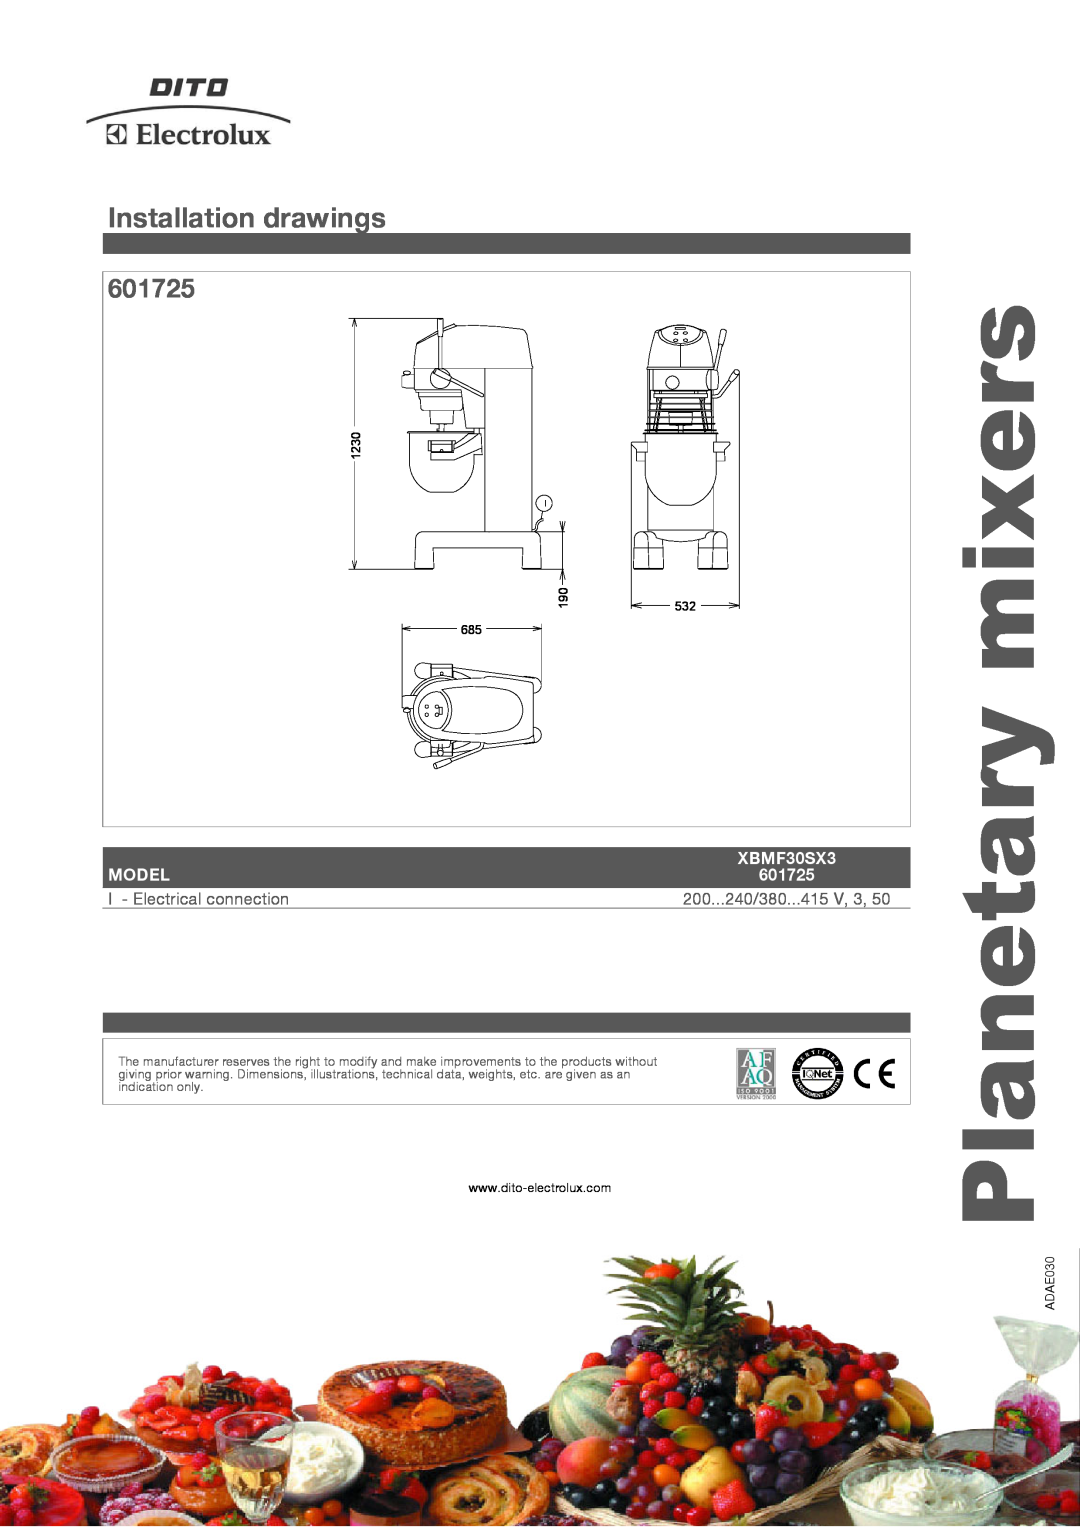 Electrolux XBMF30SX3 Installation drawings, 601725, Planetary mixers, Model, I - Electrical connection, 1230 685, ADAE030 